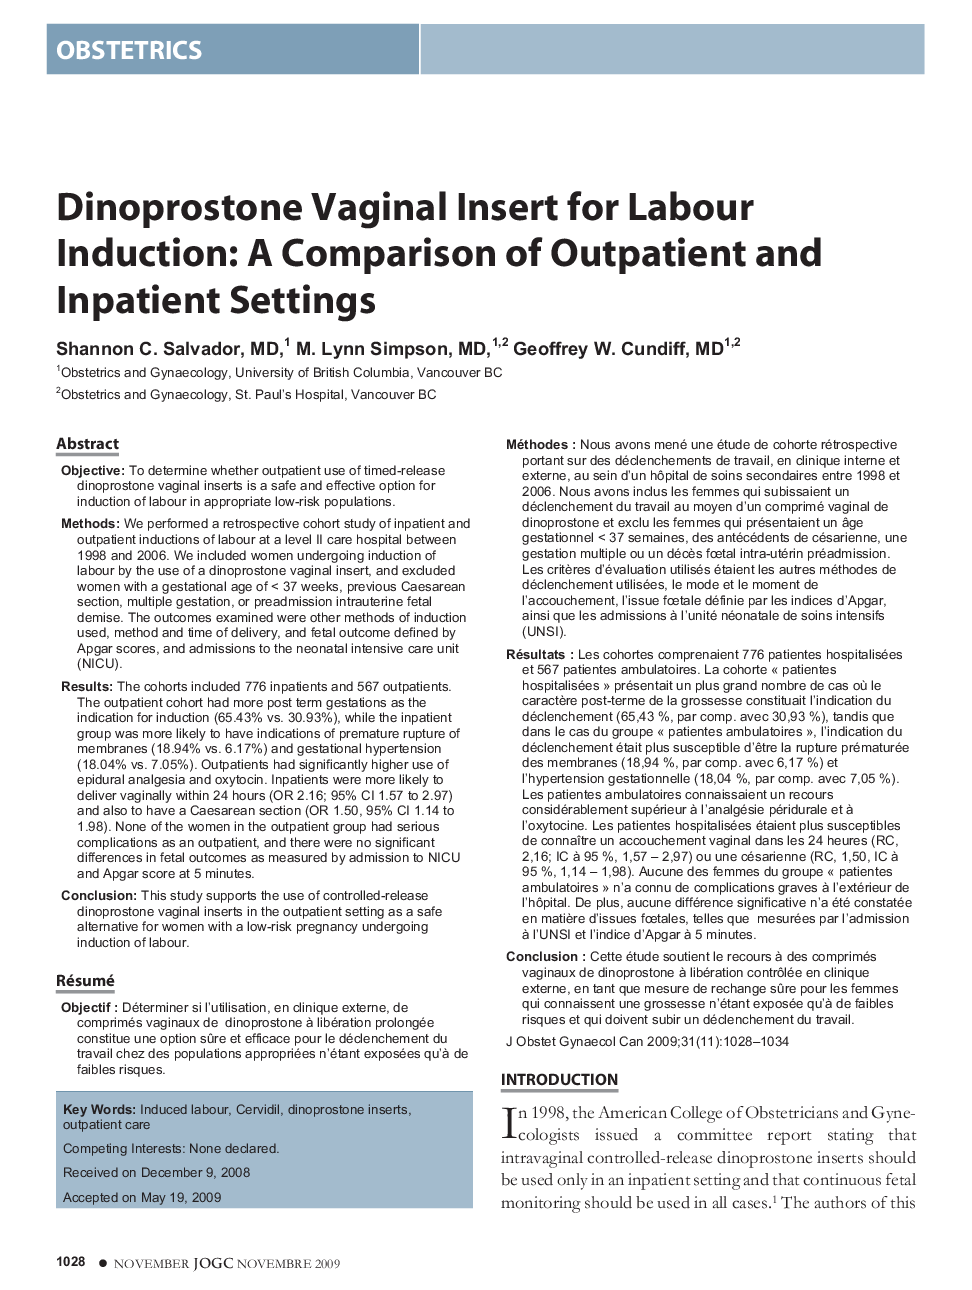 Dinoprostone Vaginal Insert for Labour Induction: A Comparison of Outpatient and Inpatient Settings